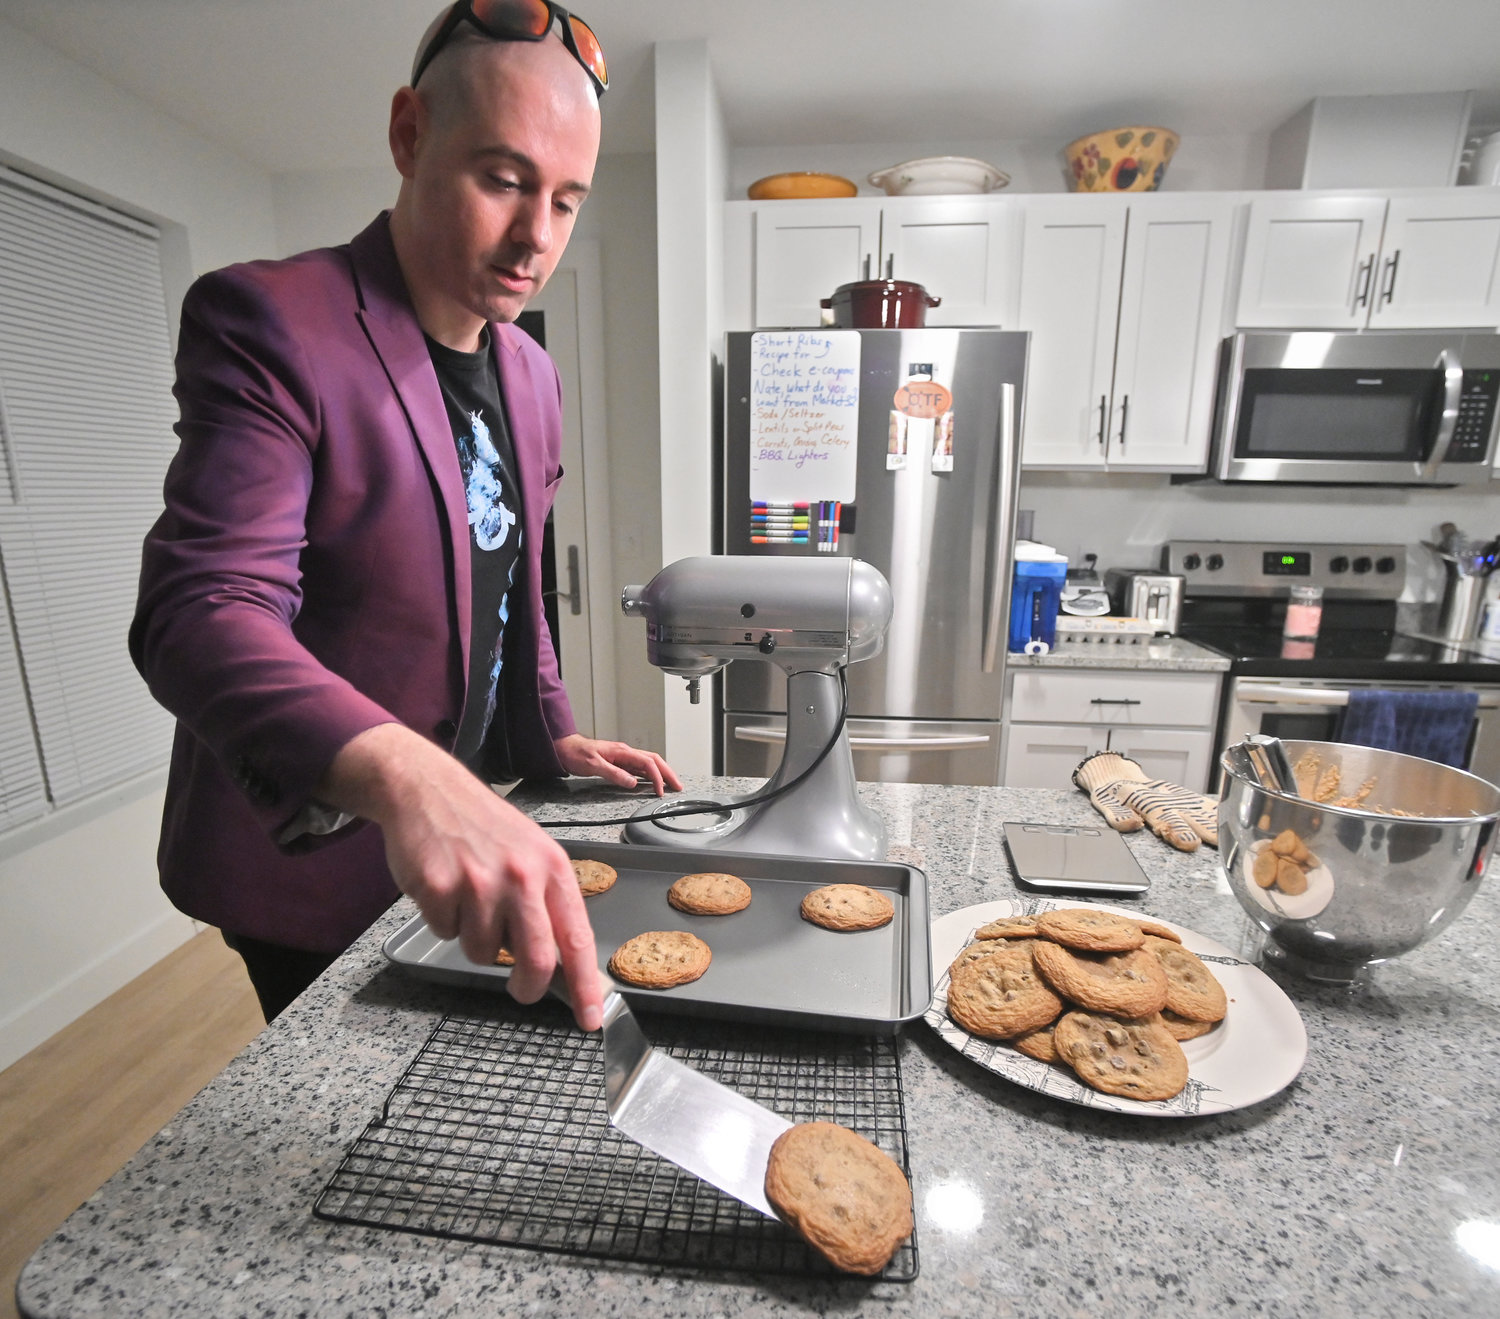 James Daino transfers his hot-from-the-oven chocolate chip cookies from the cookie sheet to the cooling rack Nov. 9 in Rome.